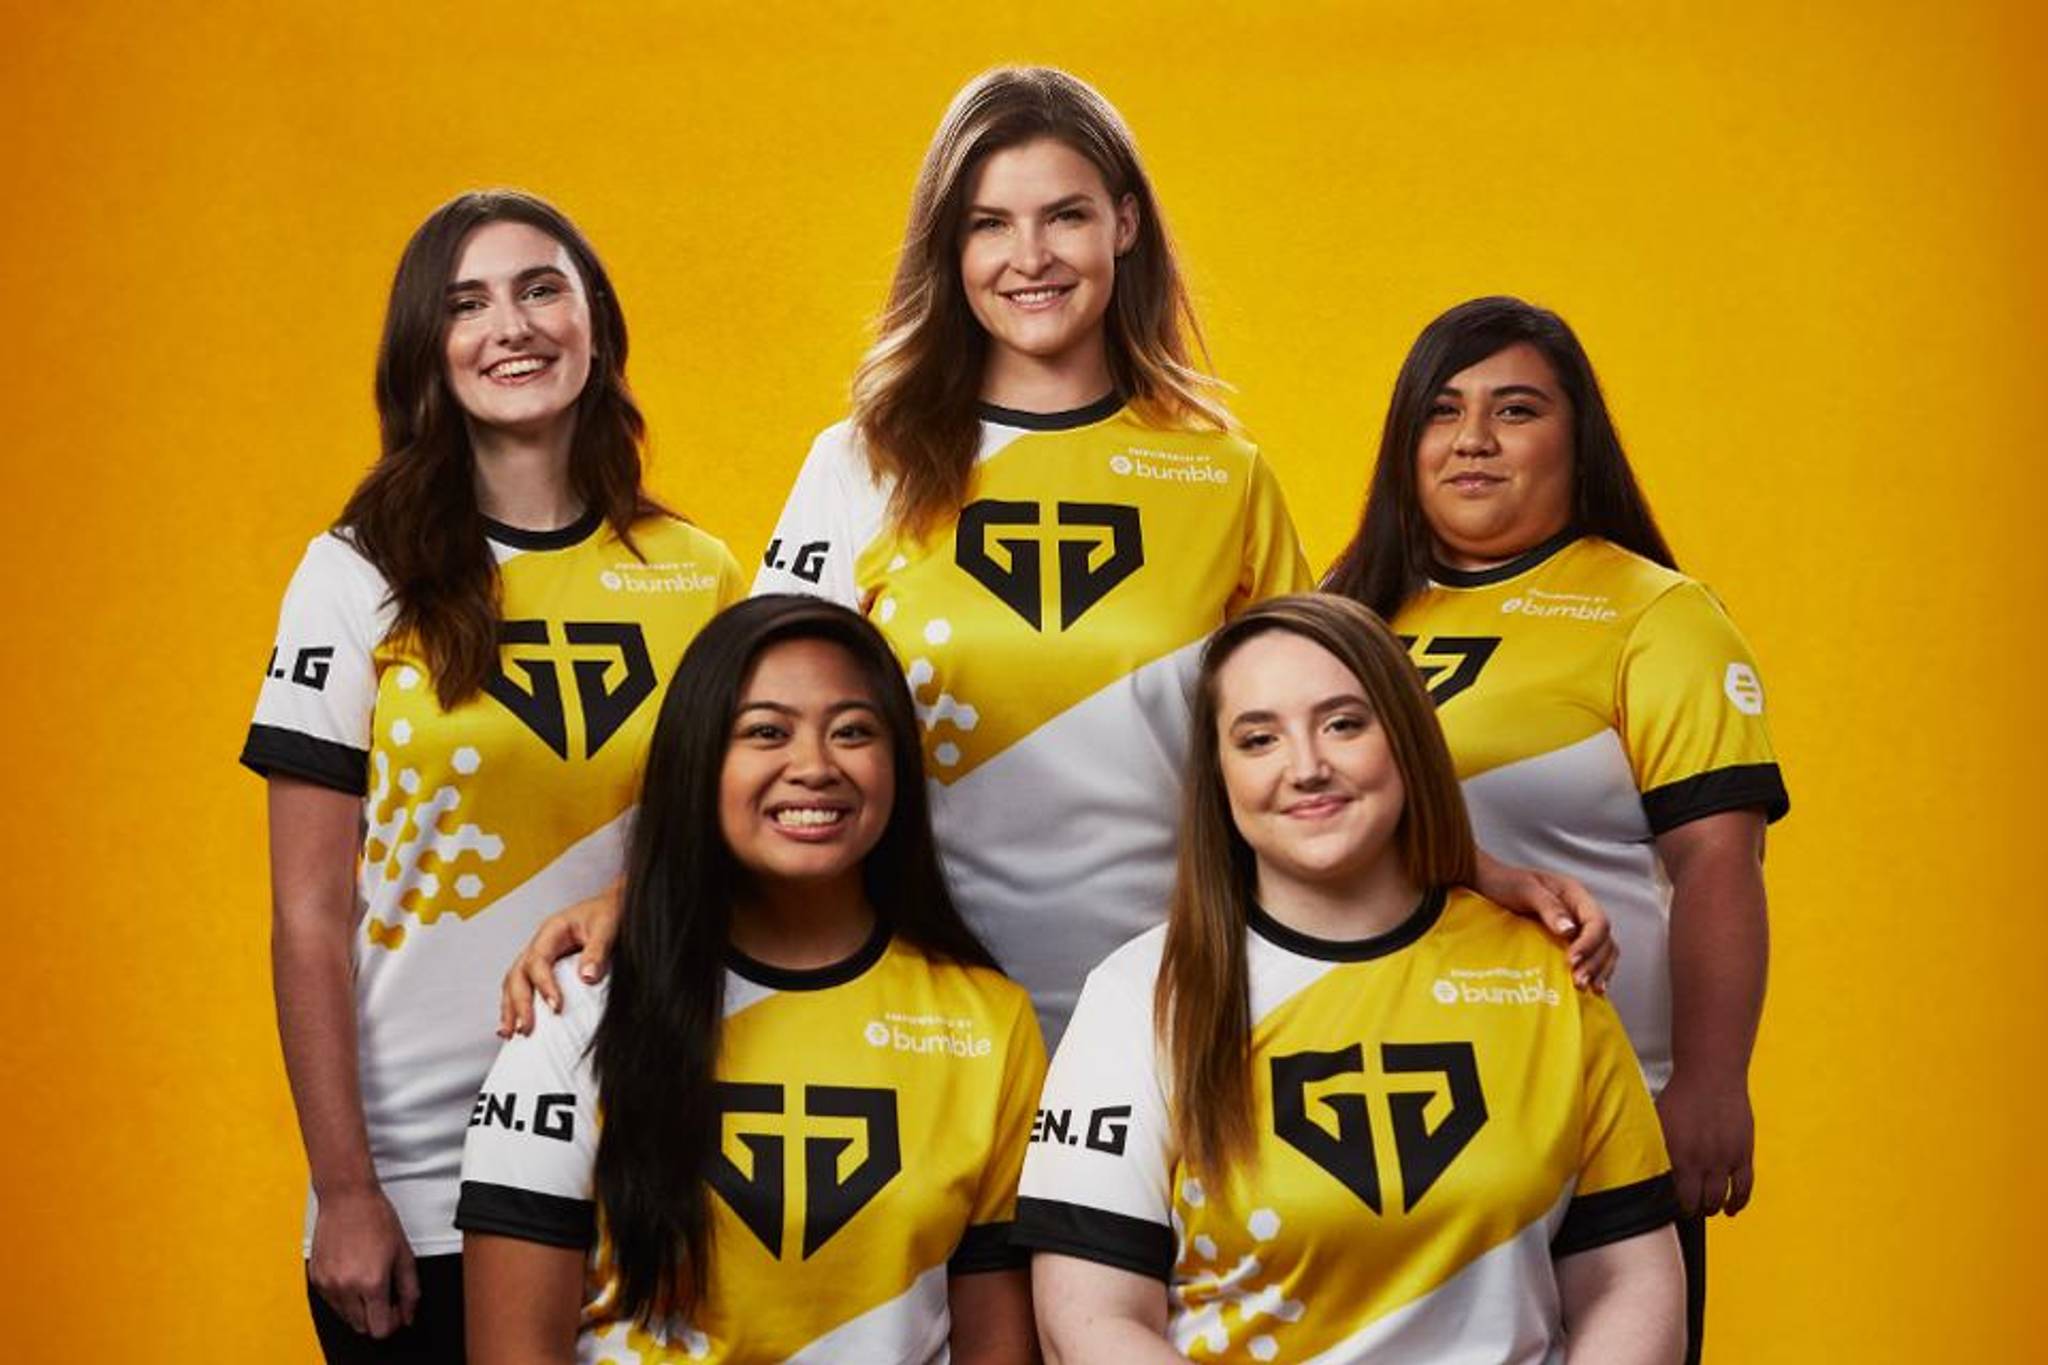 Bumble esports team aims to empower female gamers